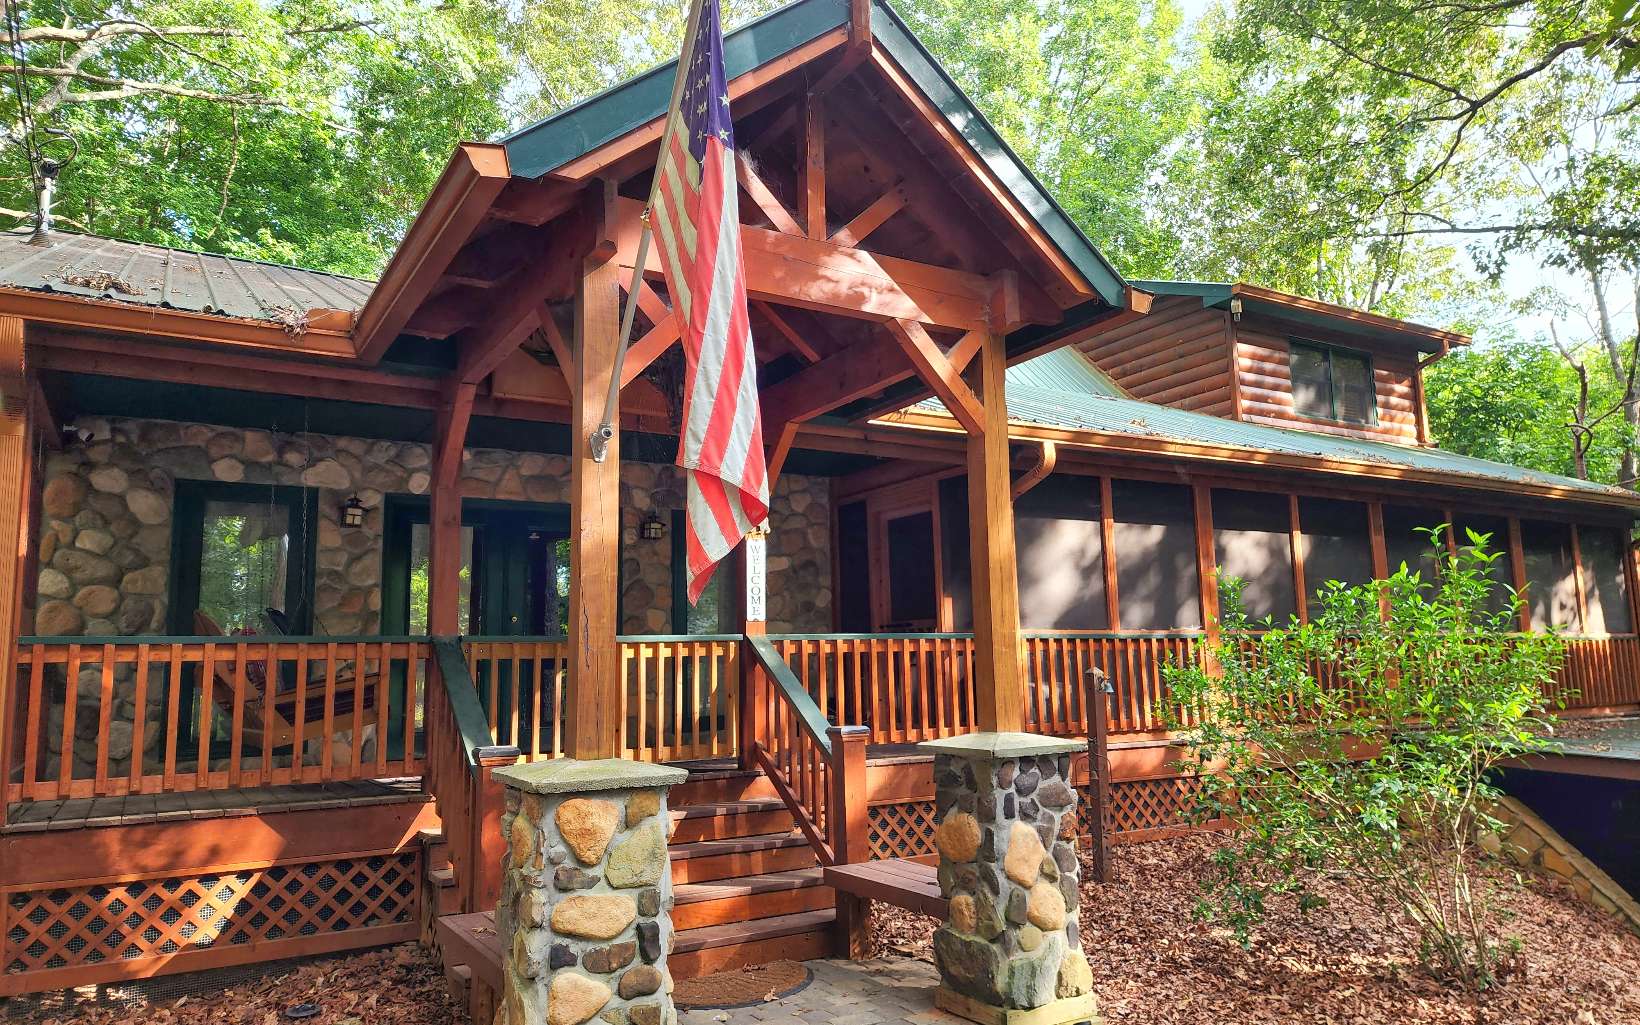 Escape to the North GA Mountains with this 3BR/2BA home. Bonus Room in basement also! Wonderful curb appeal, perfectly situated on a gentle wooded lot. You are welcomed with a rock entrance & full length covered porch & screened porch. Home features a huge living/family room w/wood burning stove & vaulted ceiling, great for family gatherings. A sitting room with stone fireplace. Renovated kitchen, opens to large deck. Finished terrace level has a bonus sleep room, a game room, 2 lg workshops. 2 outdoor sheds (both have electric, 1 is insulated), fenced in yard, carport. Gated community, close to the gate, less than 5 miles from town. Sold partially Furnished will Provide List. Permitted for a 2 bed septic. Septic cleaned 2021.